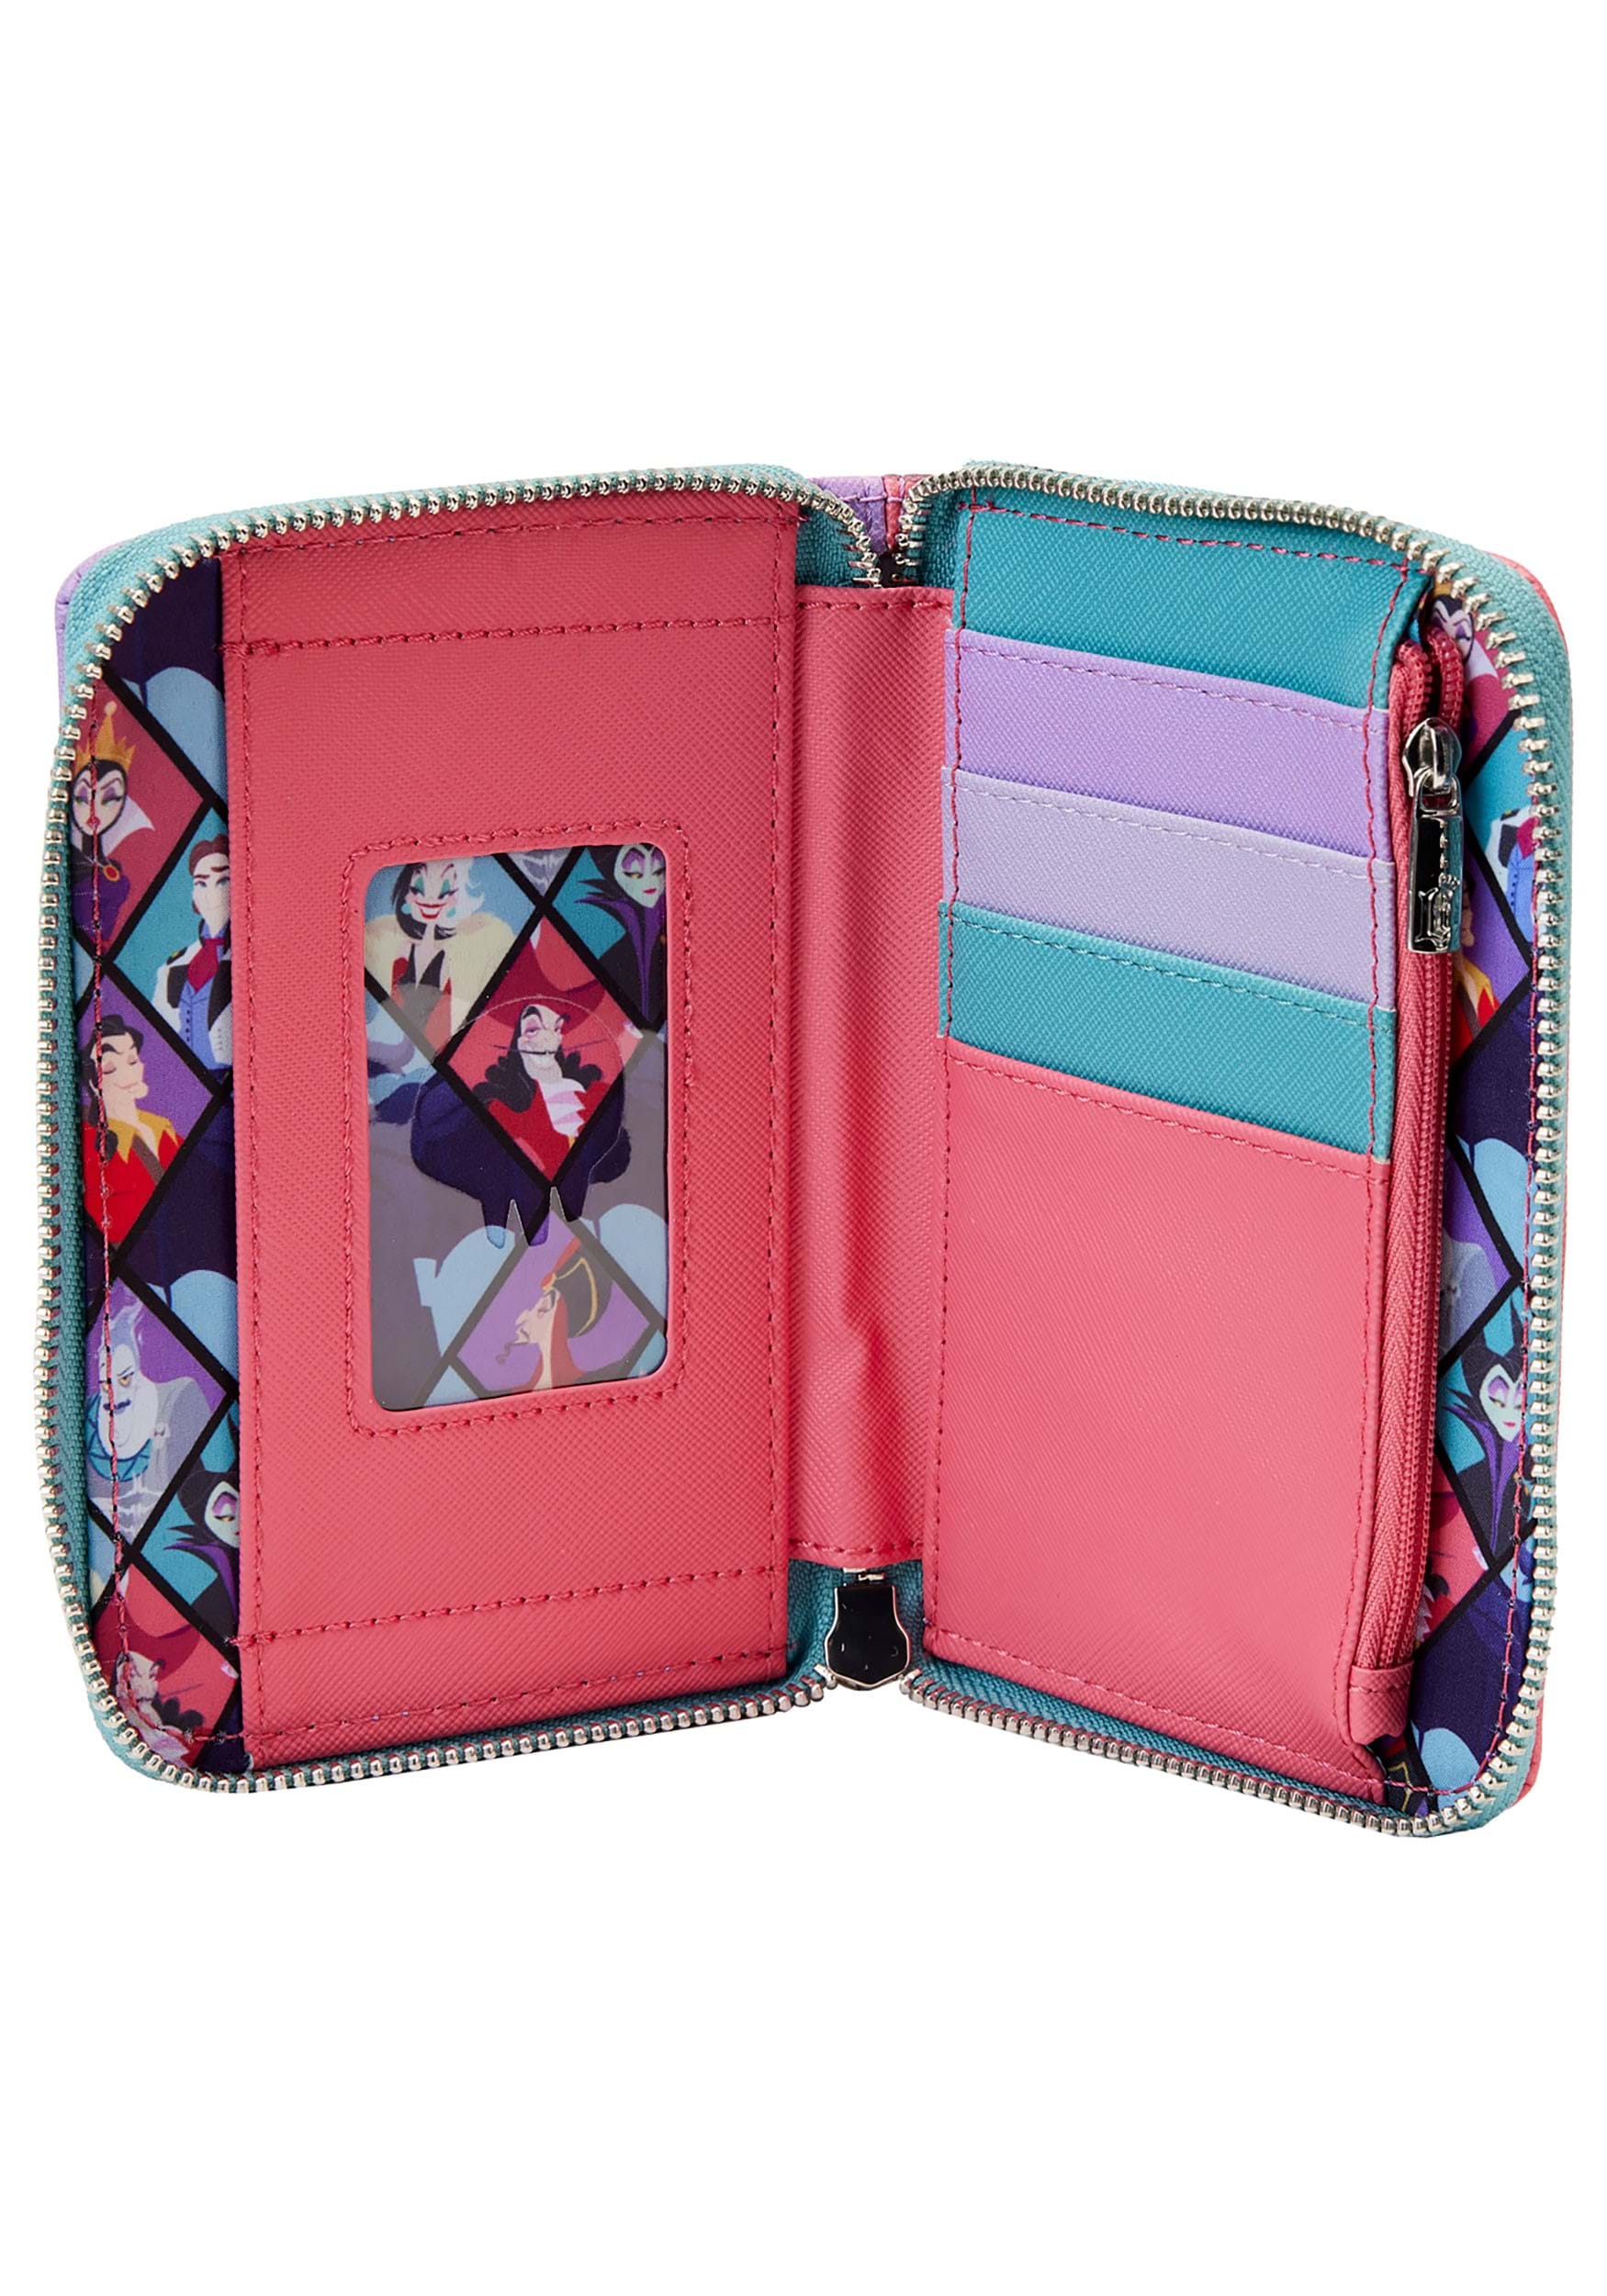 Disney Villains Color Block Zip Around Wallet By Loungefly